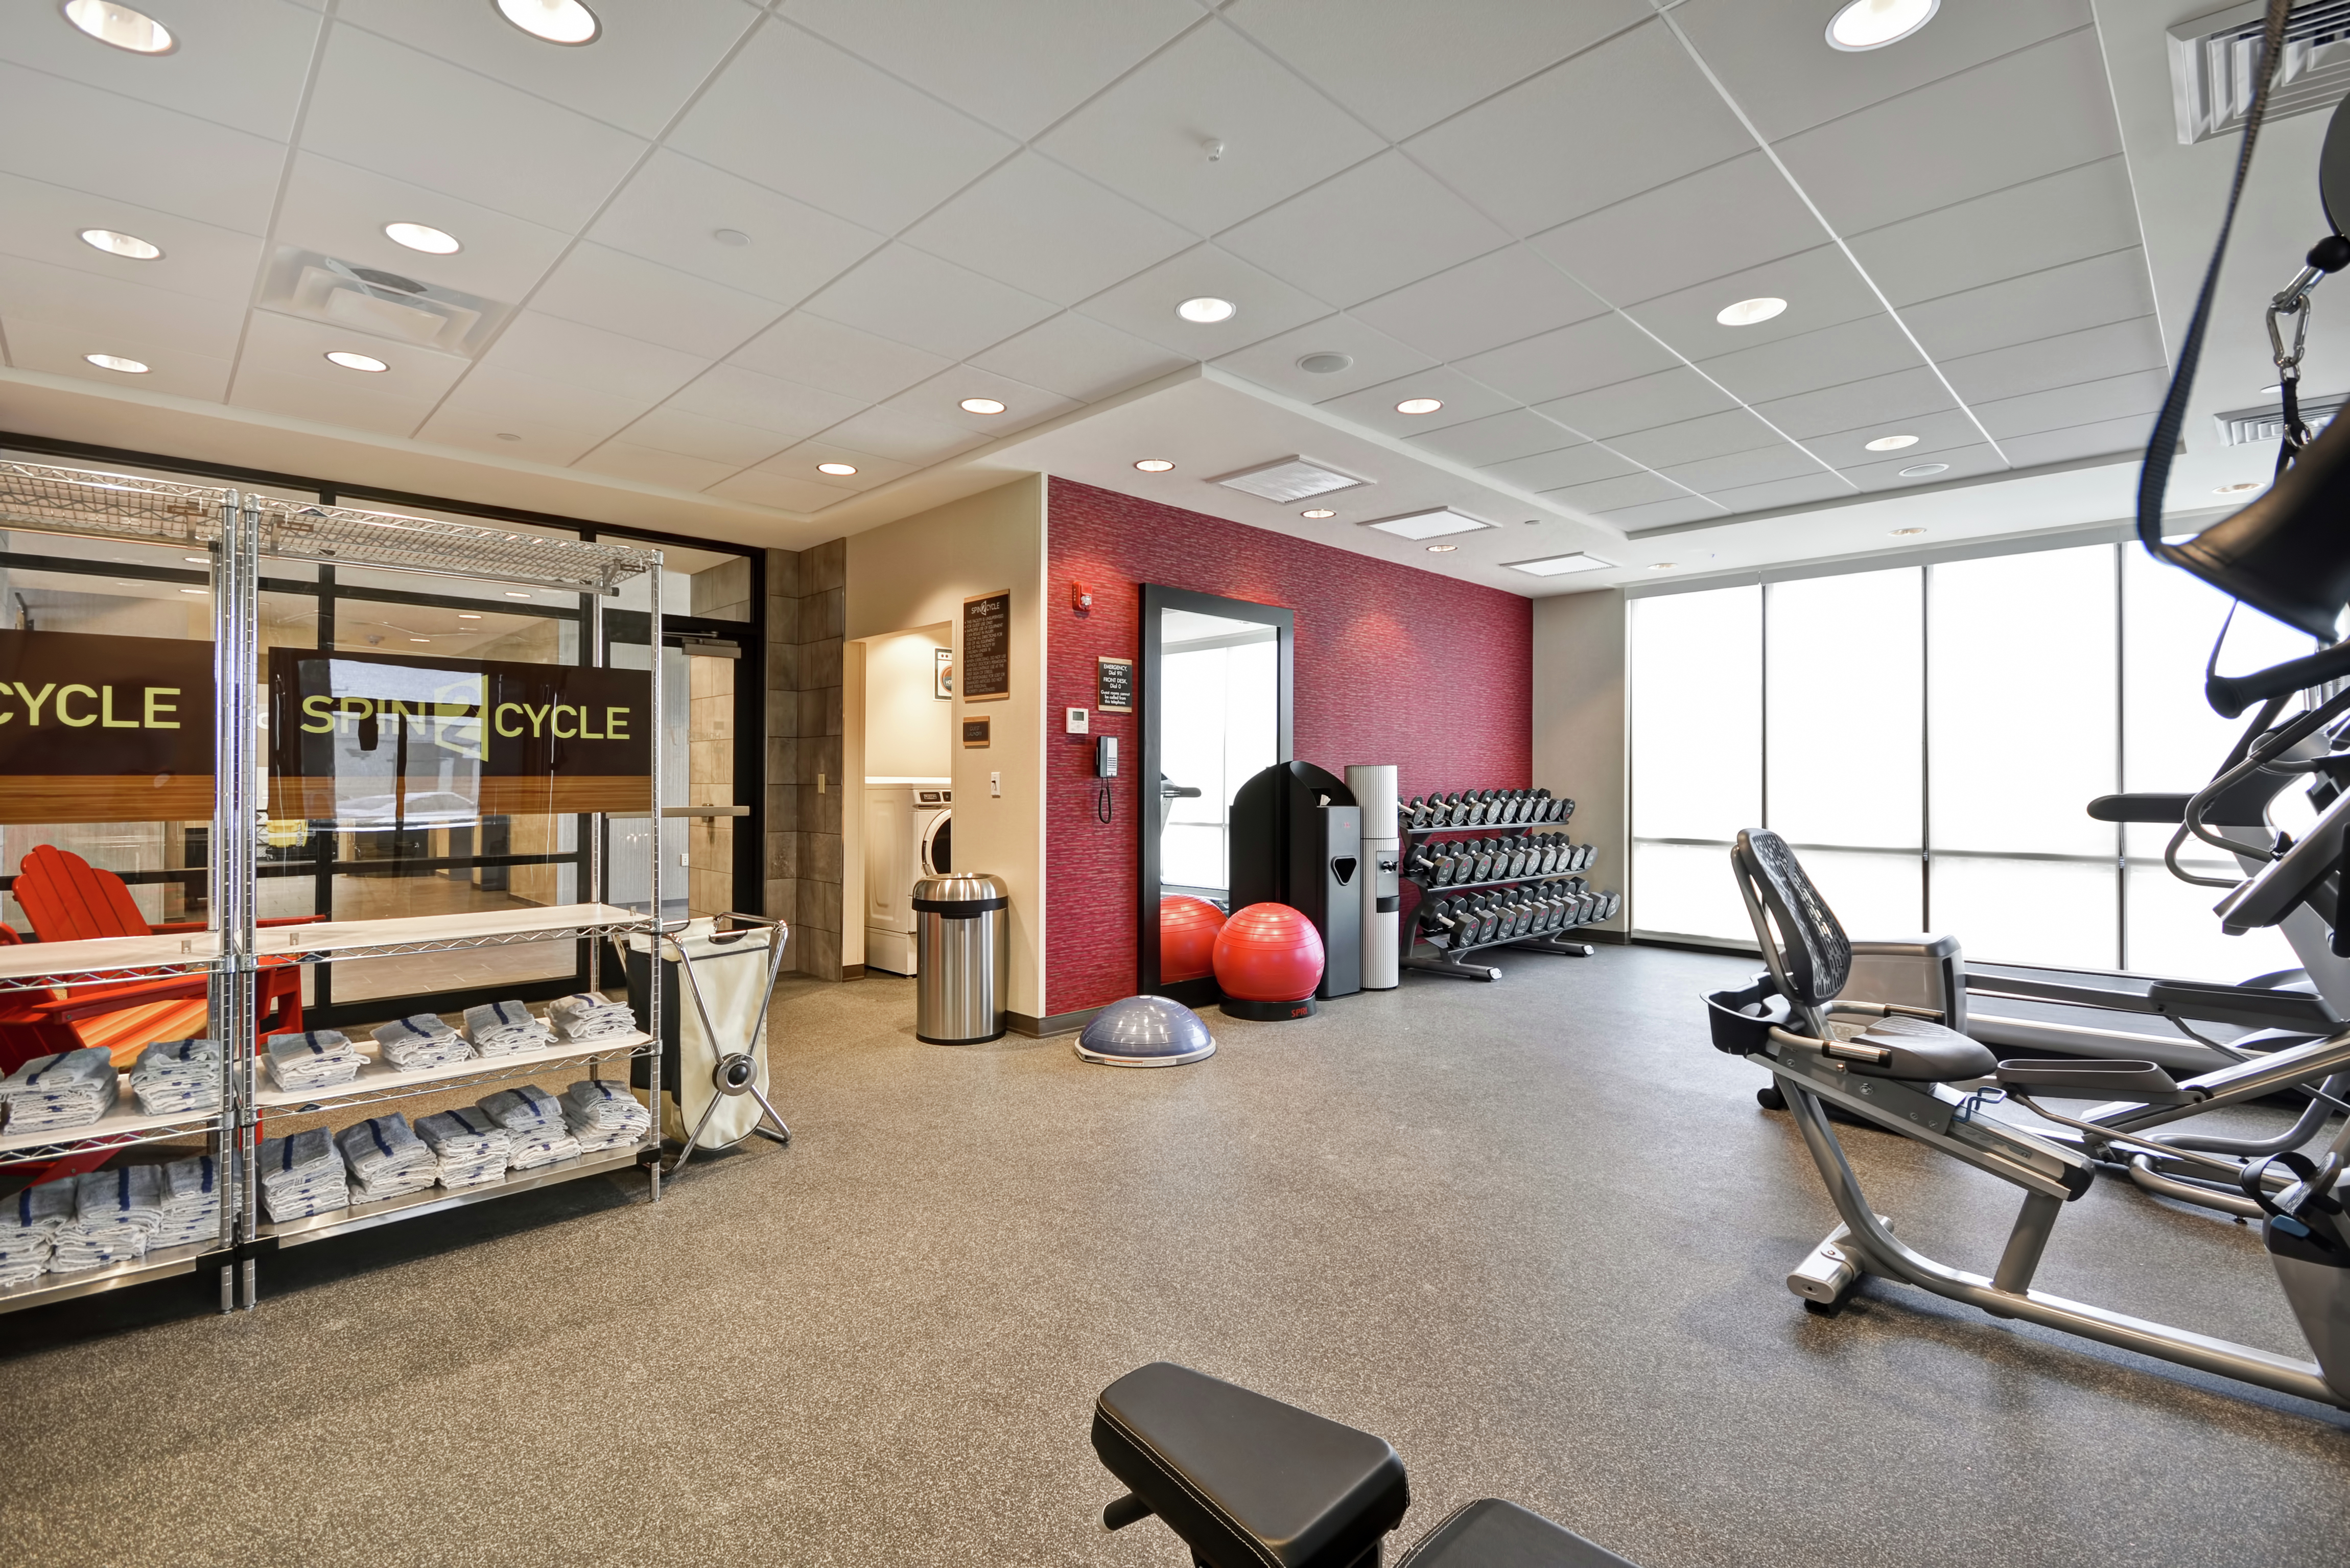 Fitness Room with Weights and Other Exercise Equipment